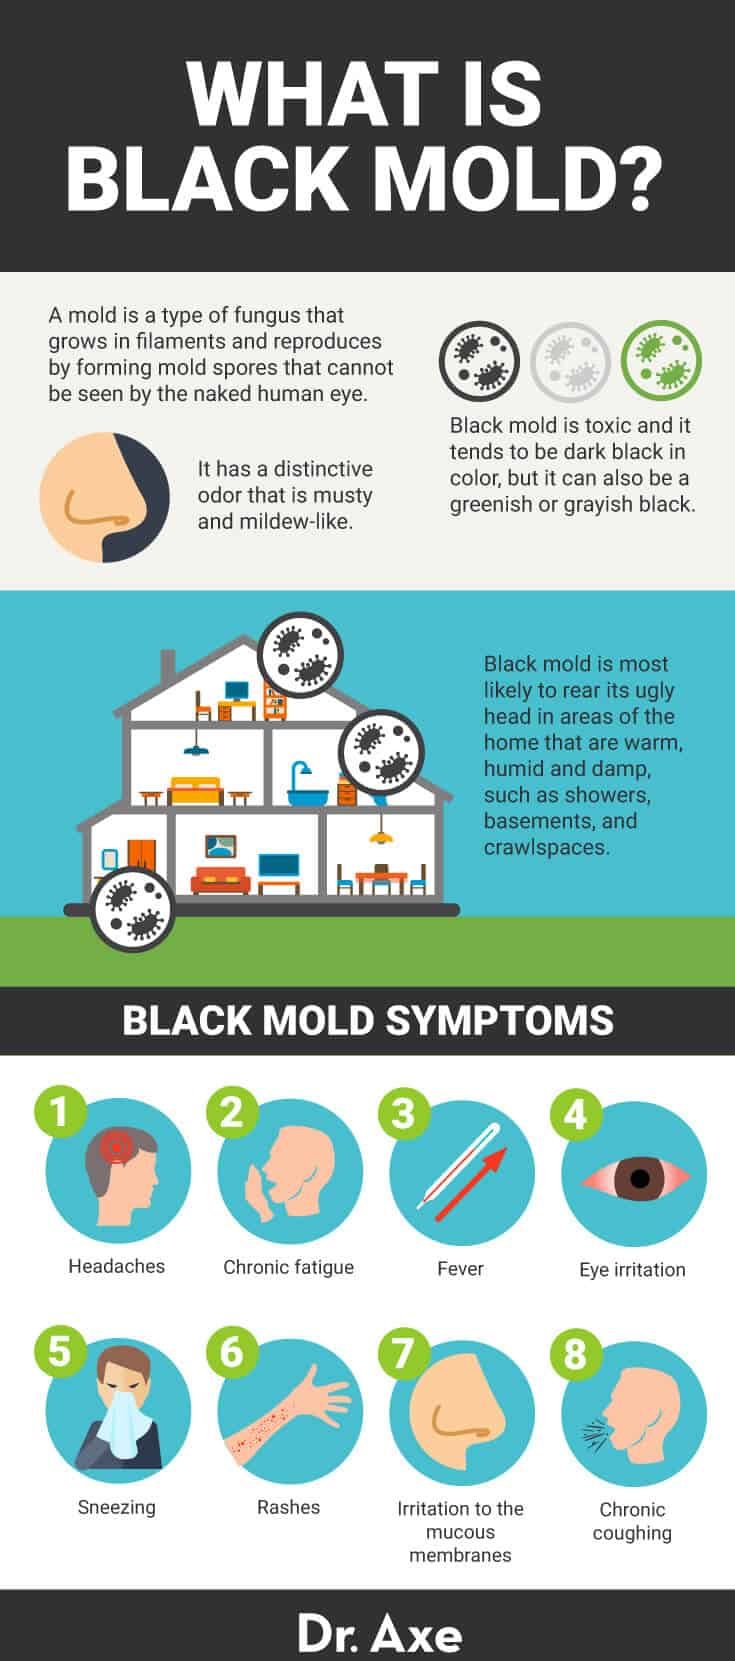 See 10 Warning Signs Of Mold Toxicity